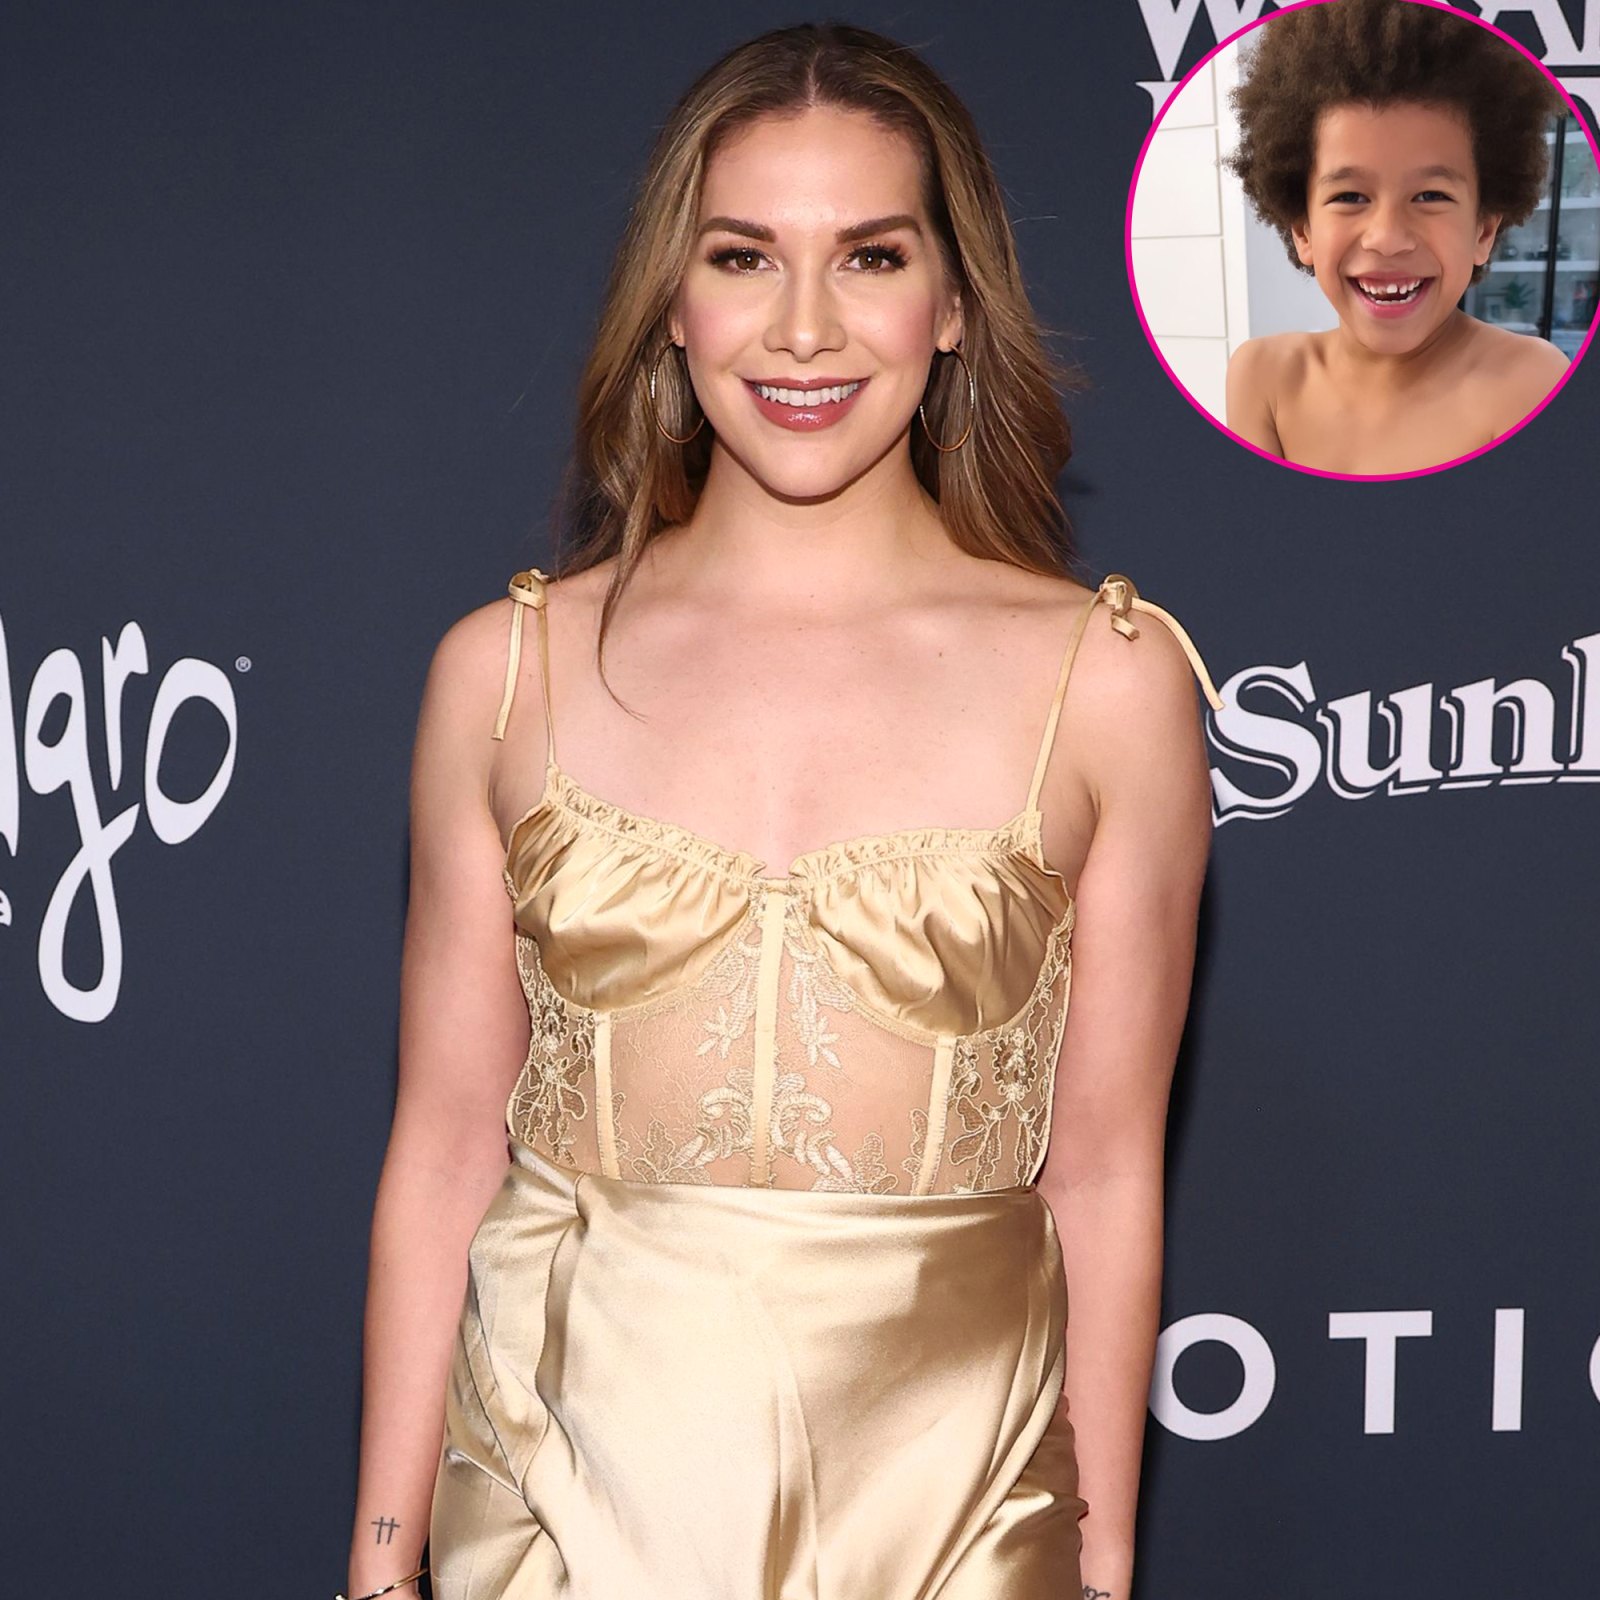 Allison Holker’s Son and More Celeb Kids Who Help in the Kitchen